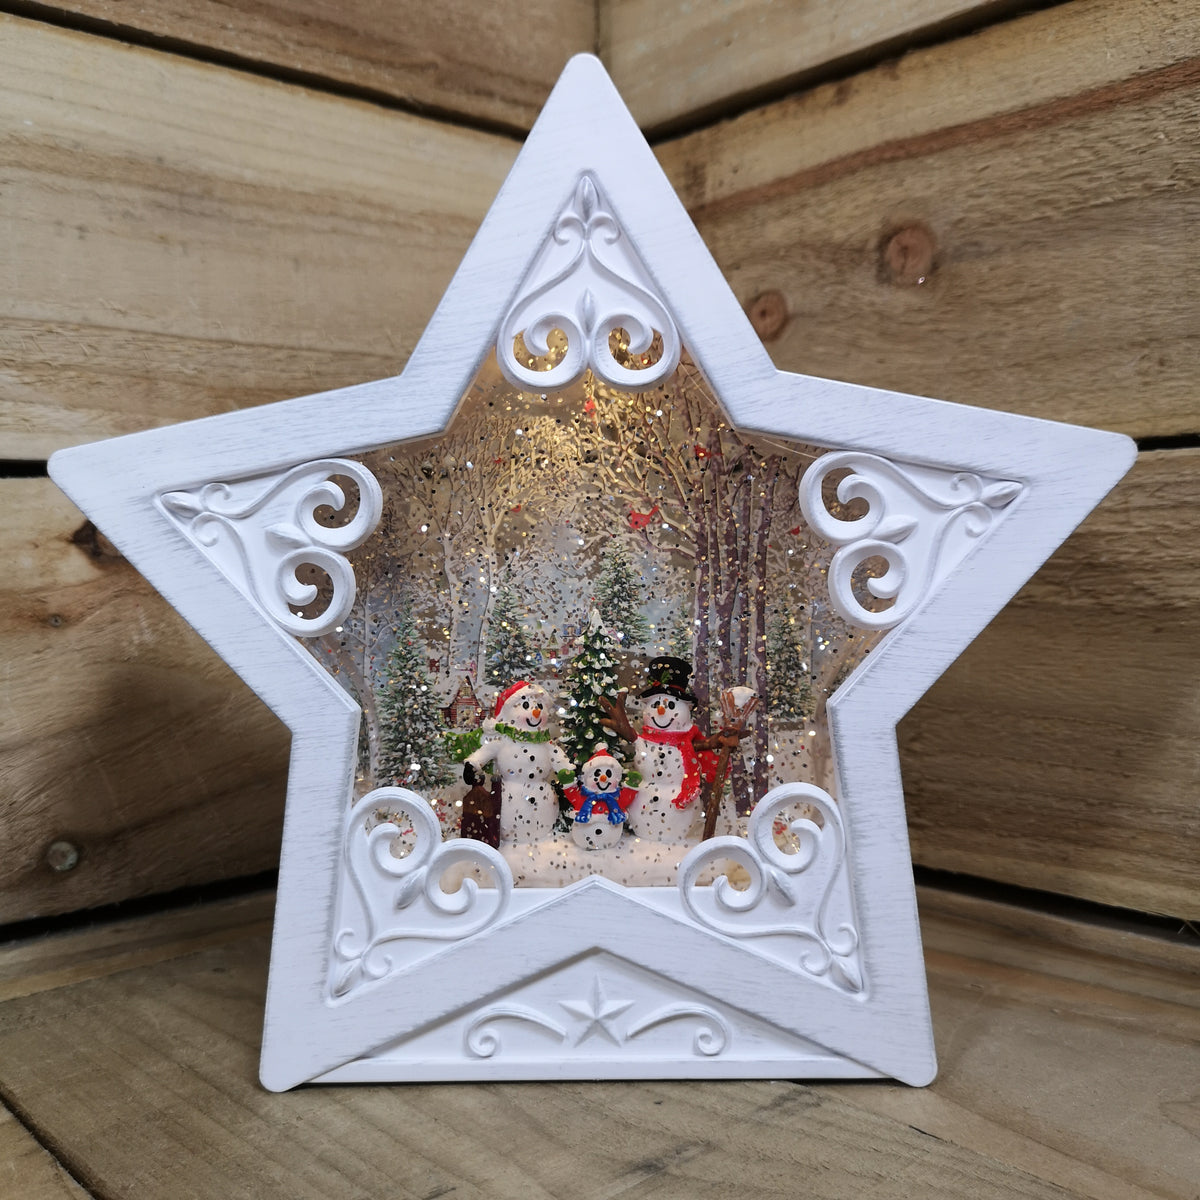 25cm Snowtime LED Christmas Water Star With Snowmen Scene